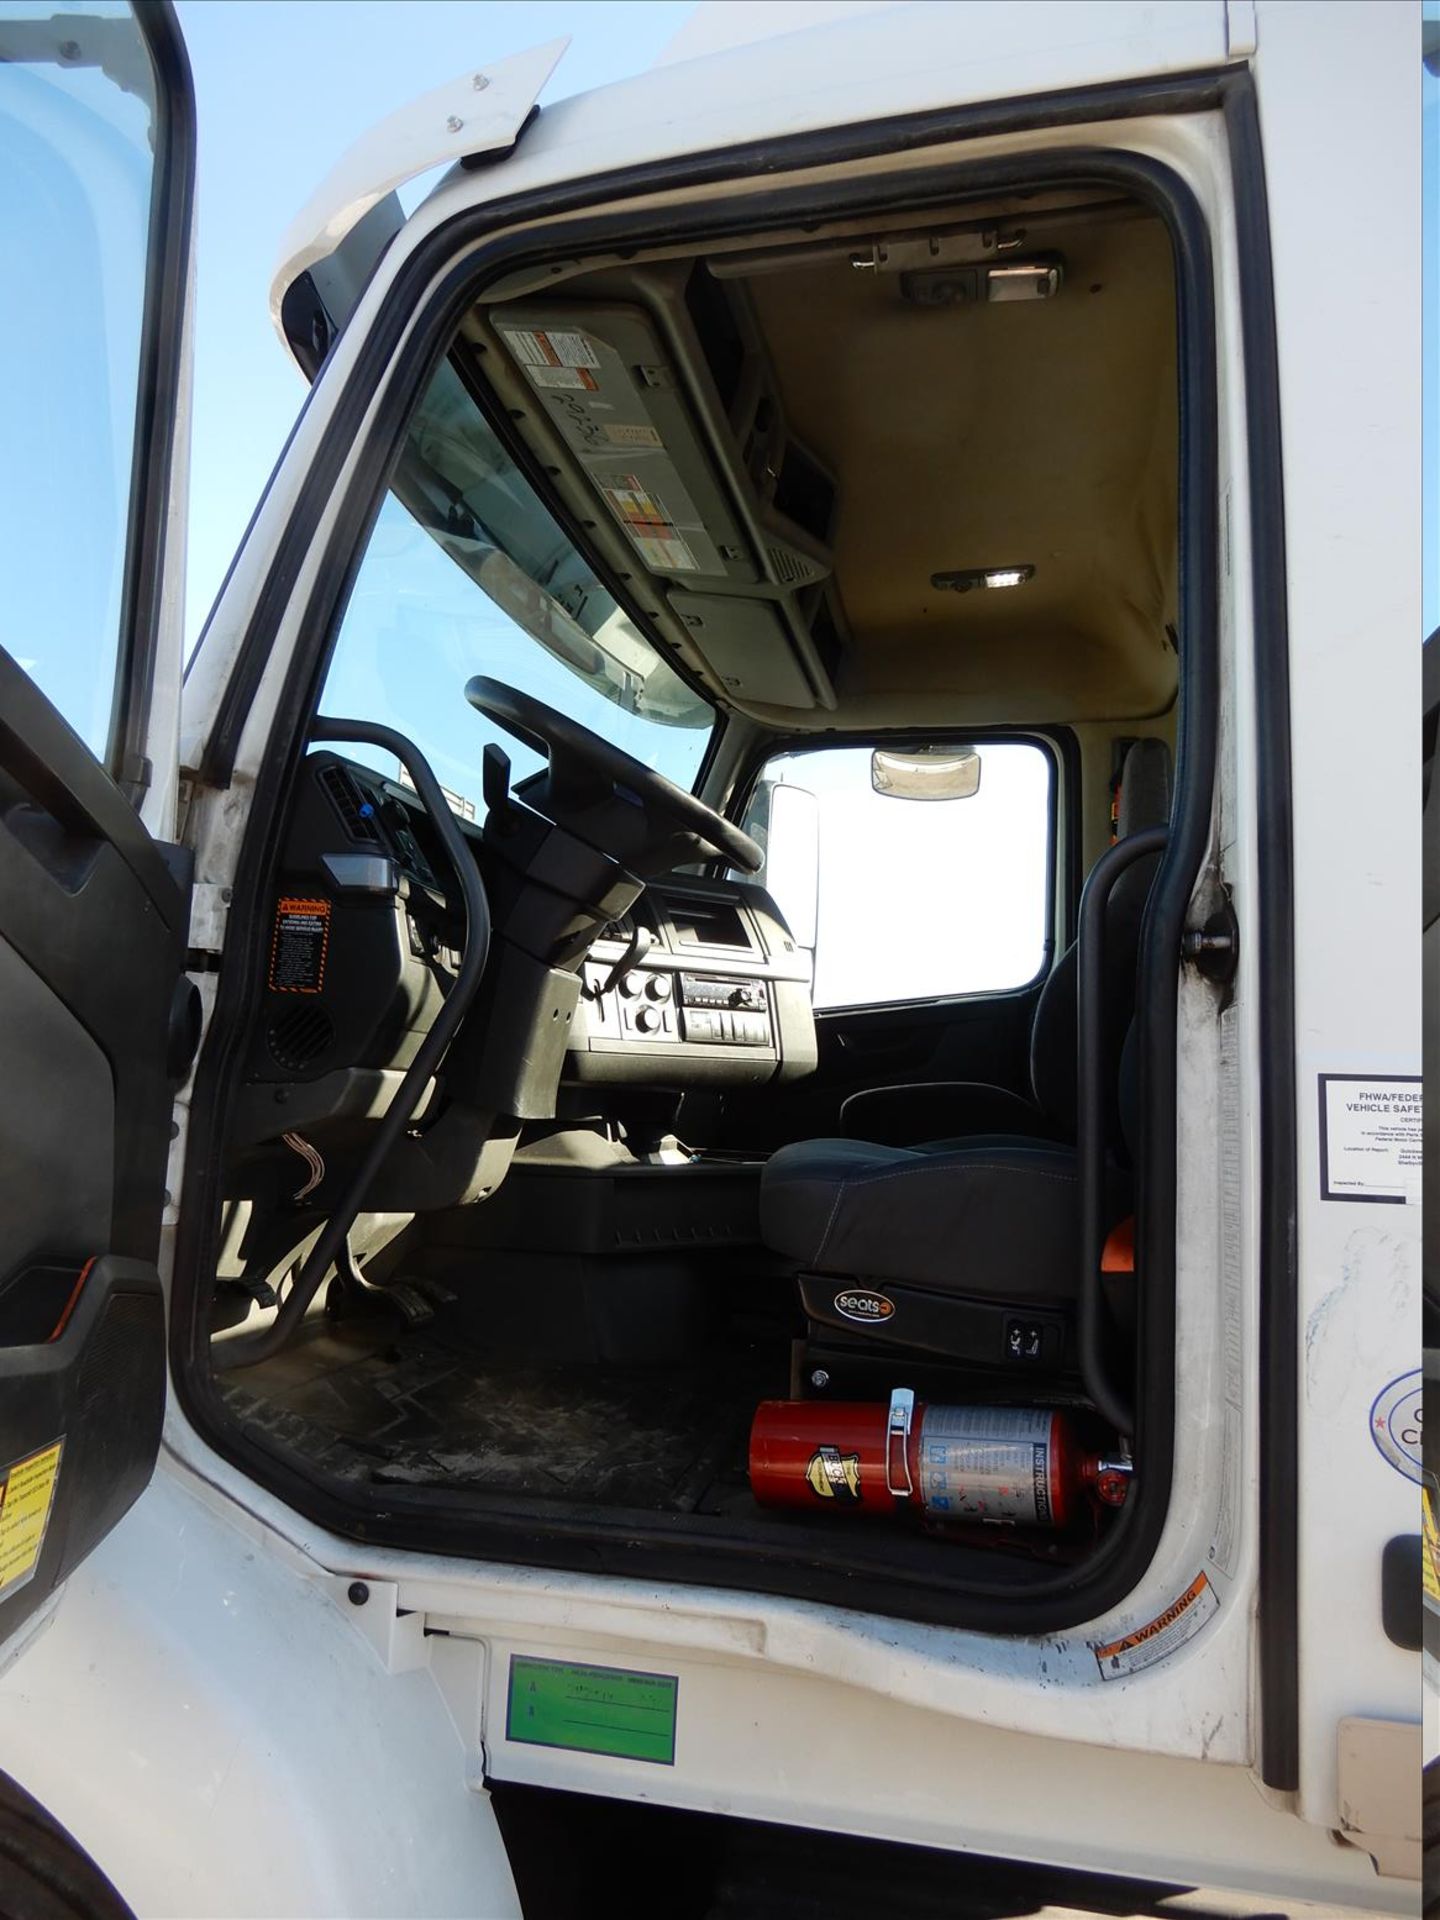 2019 Volvo VNR 300 Daycab Truck Tractor - Located in Indianapolis, IN - Image 36 of 61